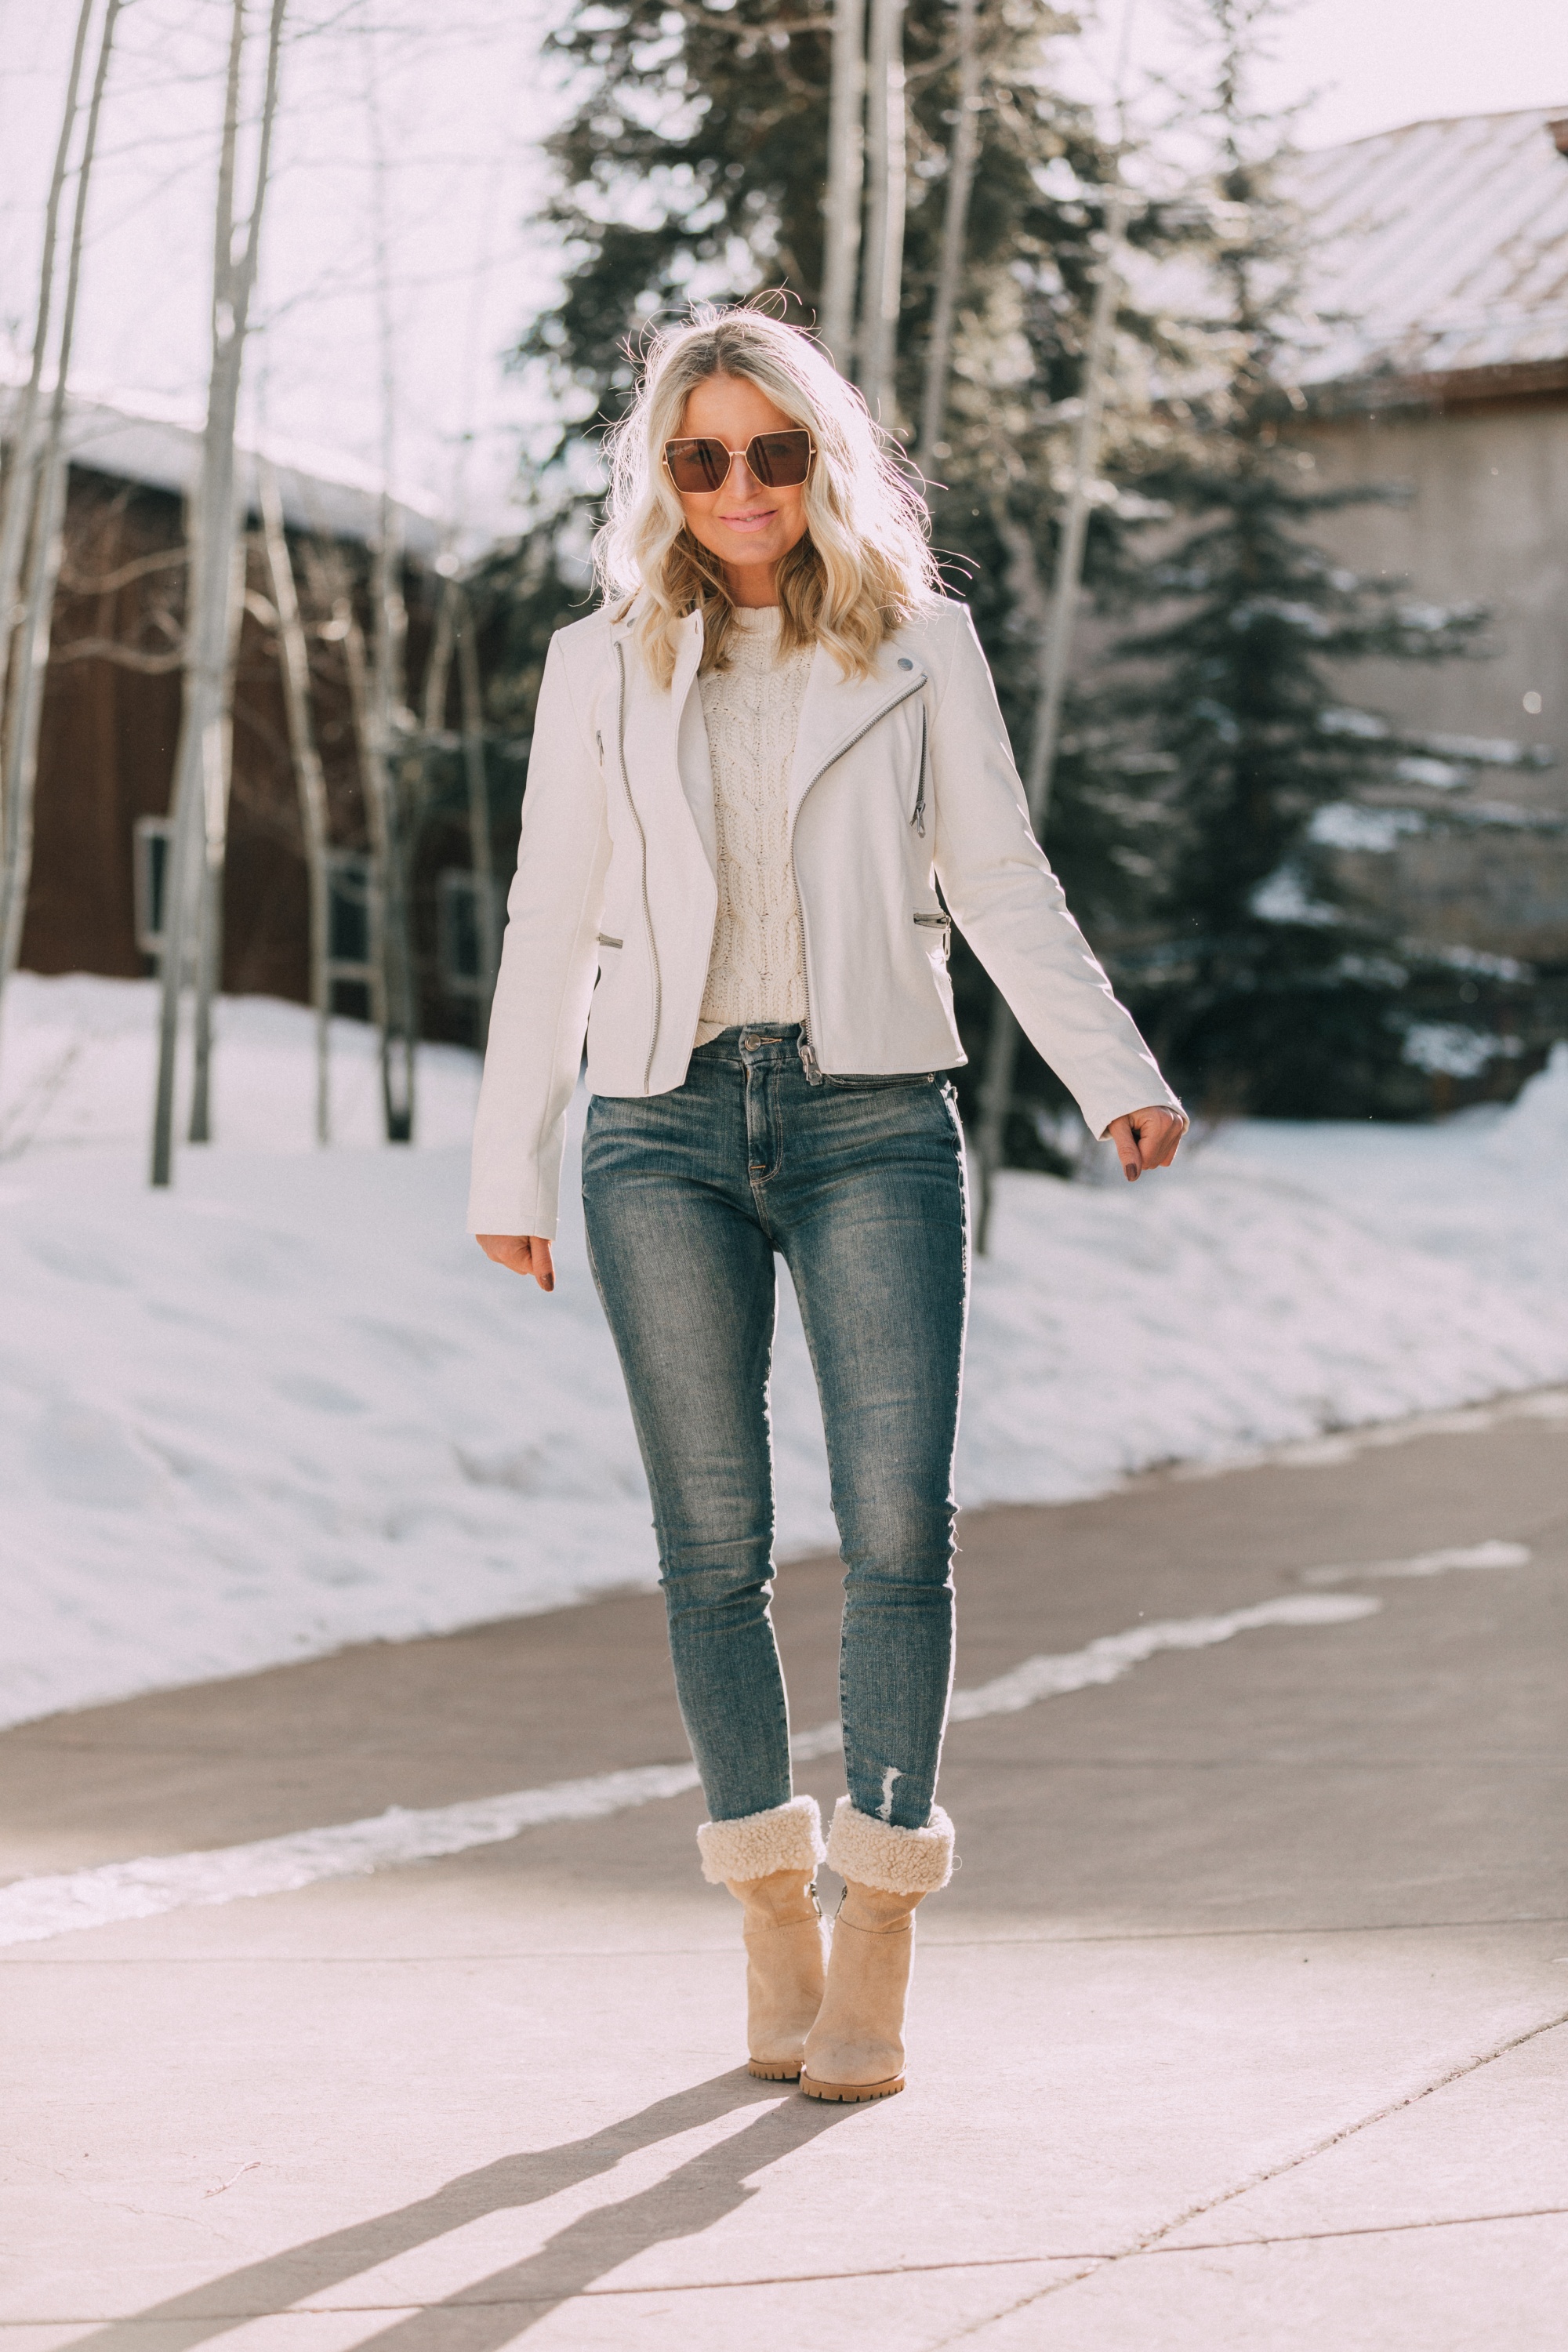 Winter White, Fashion blogger Erin Busbee of BusbeeStyle.com wearing a white faux leather moto jacket by Scoop, white cable knit sweater by Scoop, medium wash skinny jeans, and faux shearling foldover boots by Scoop from Walmart in Telluride, Colorado